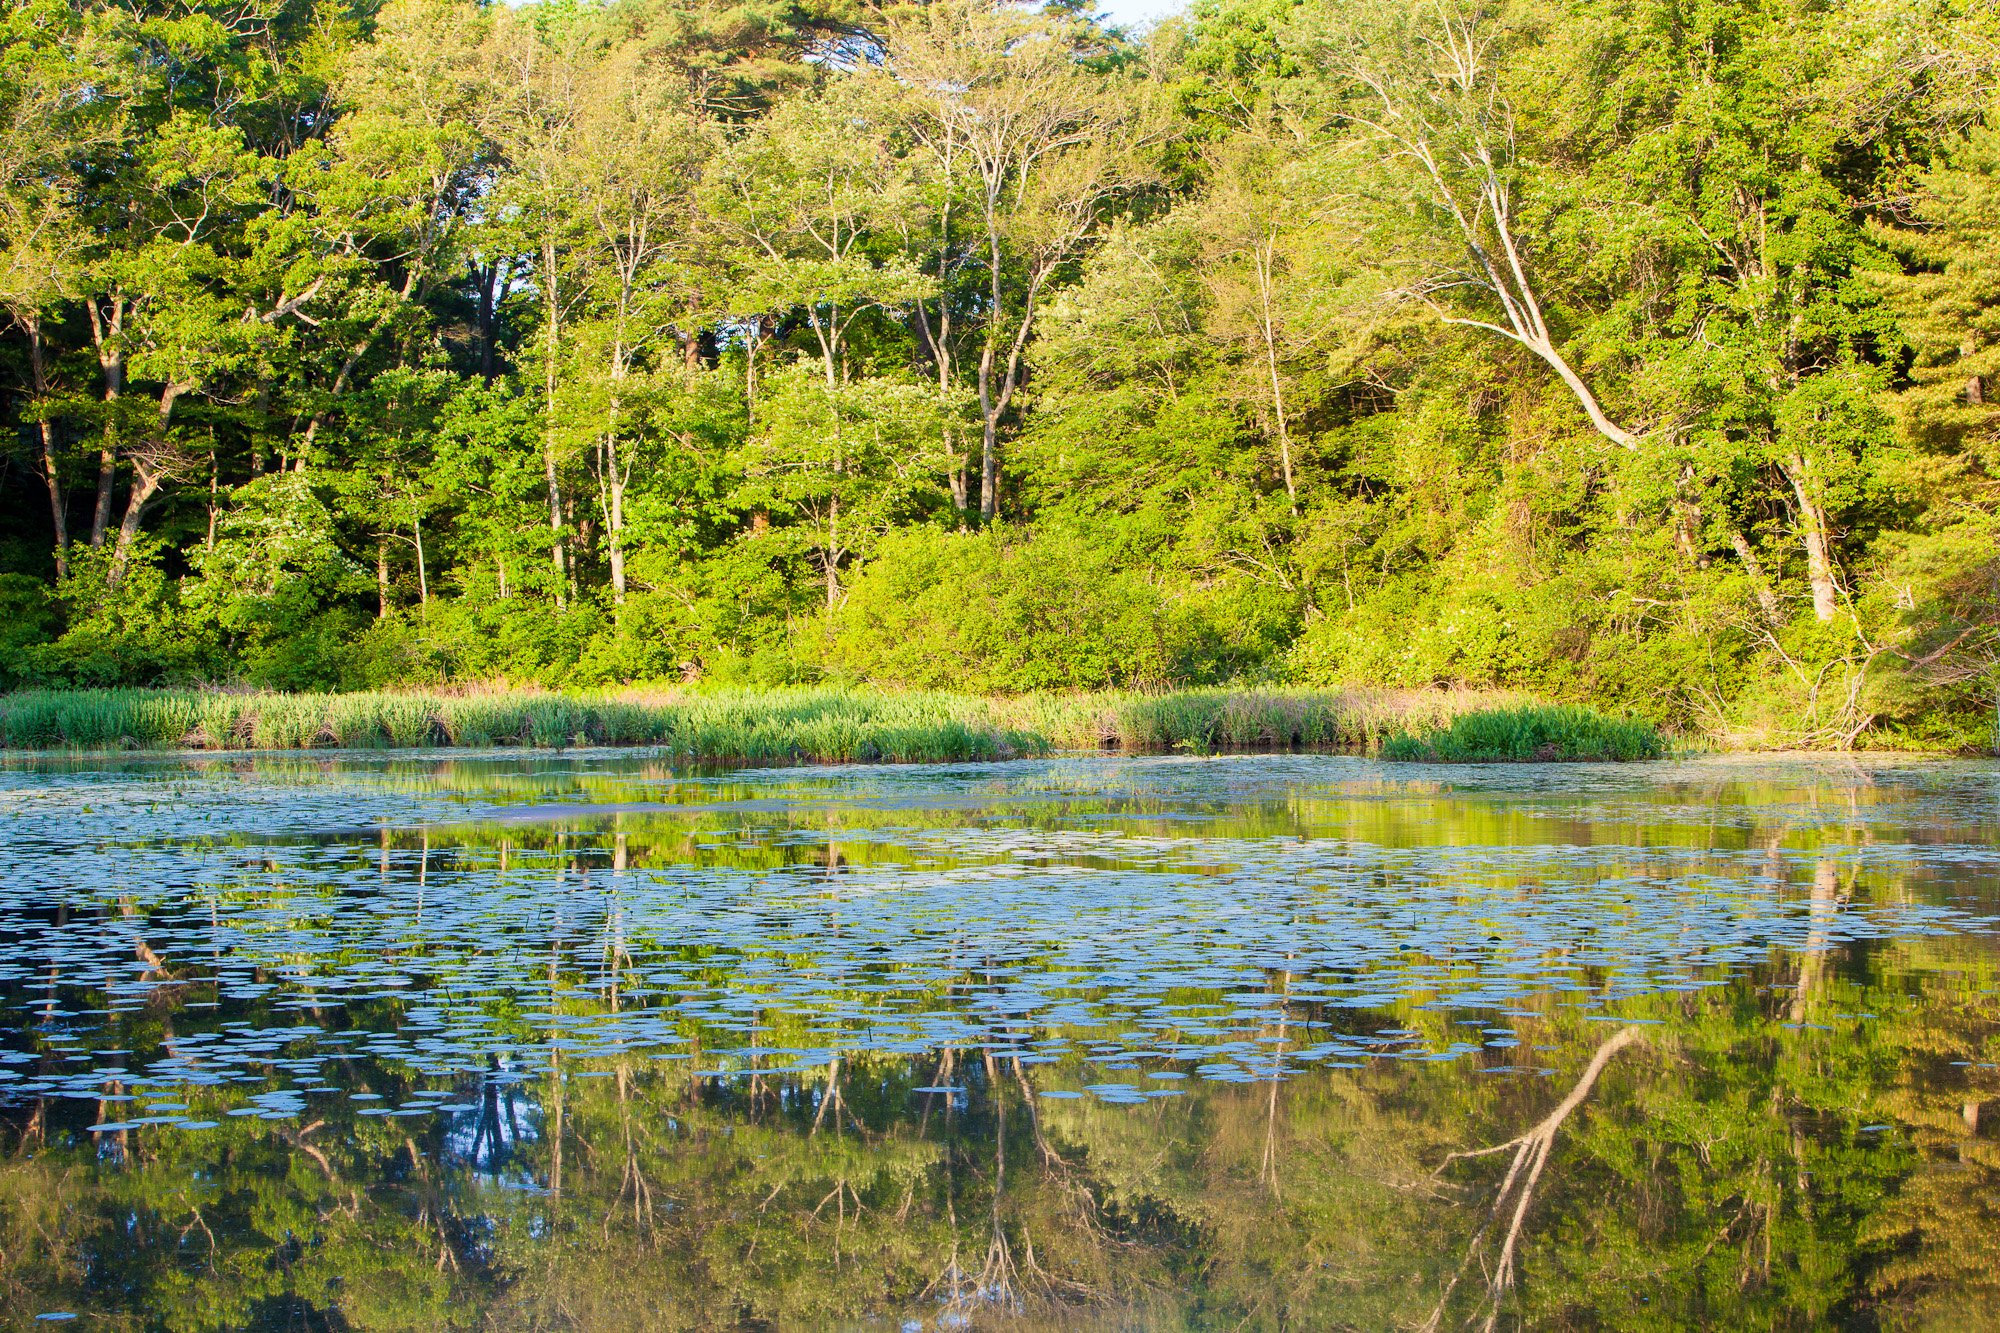  Morning reflections in a pond at the O.W. Stewart Preserve in Kingston, Massachusetts. 